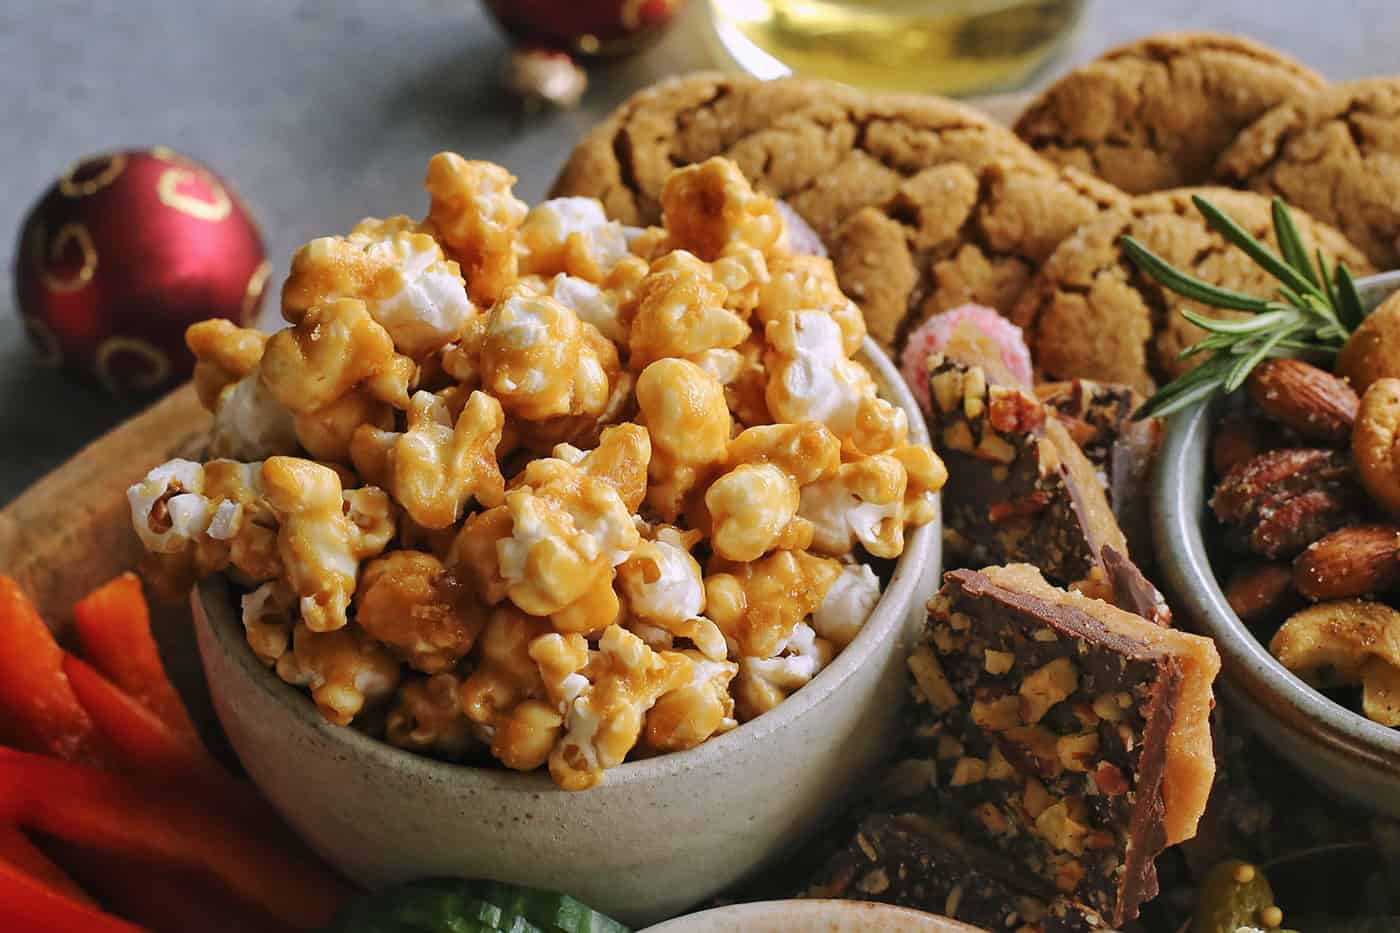 caramel corn in a pottery bowl